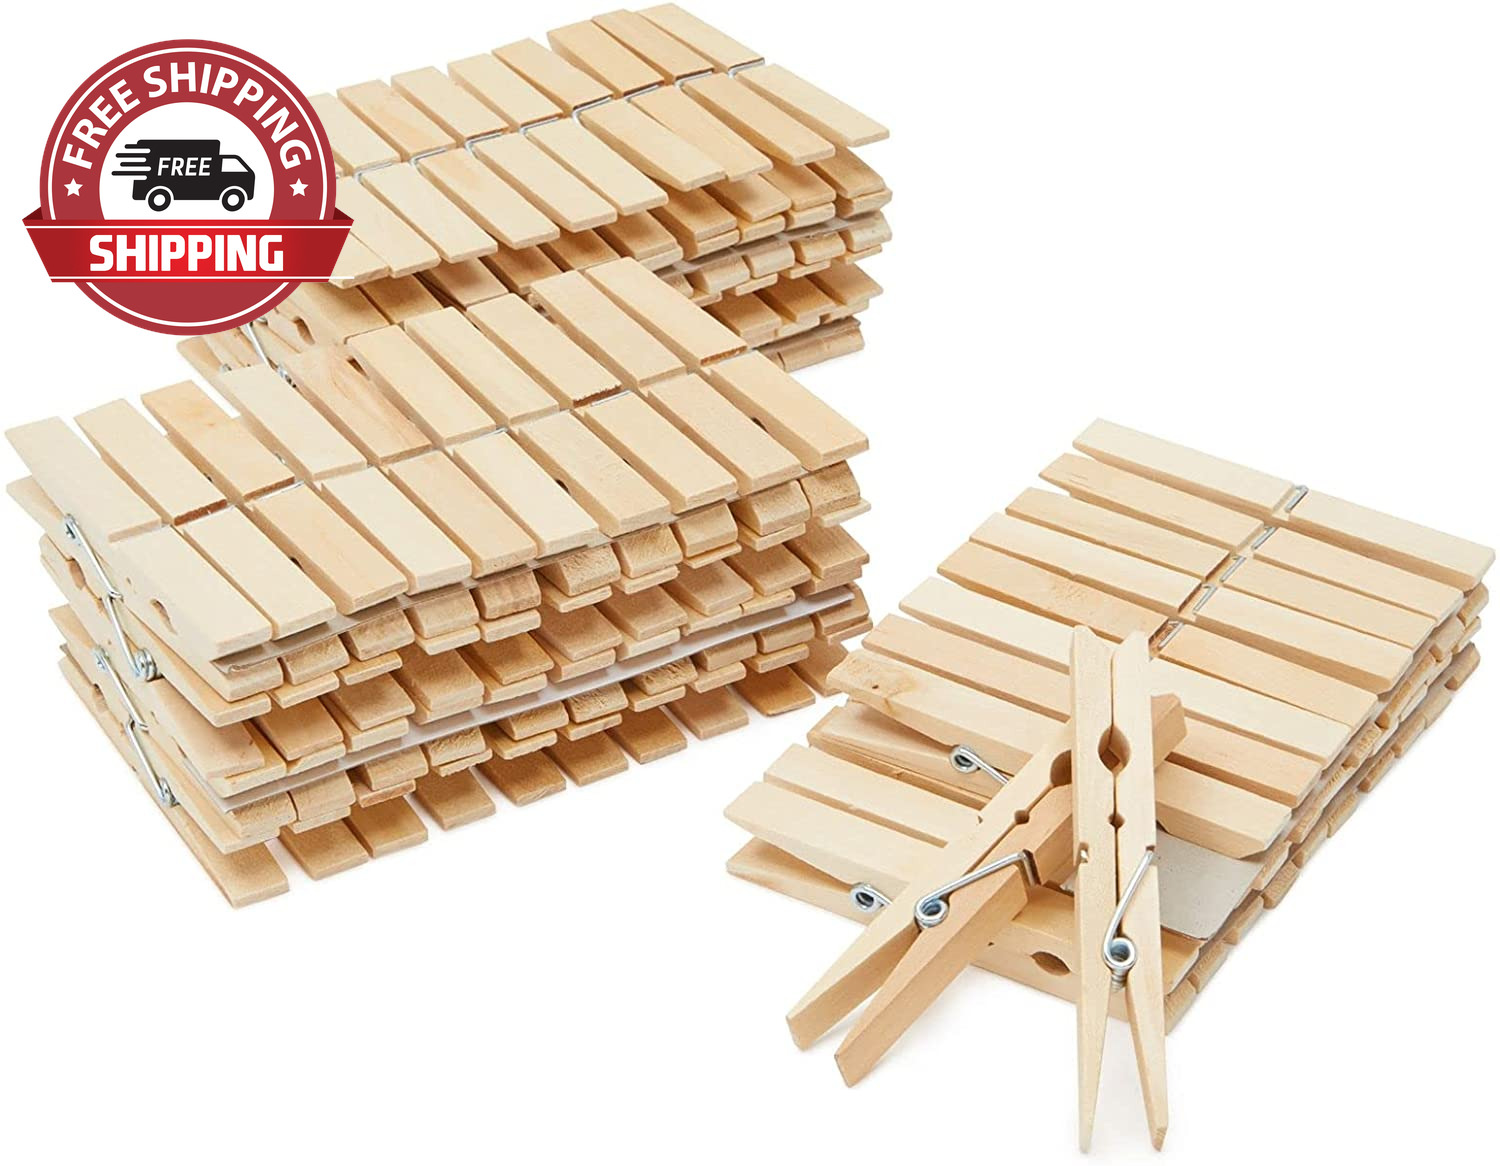 100 Pack Wooden Clothespins, 4 Inch Heavy Duty Clothes Pins For Hanging, Outdoor